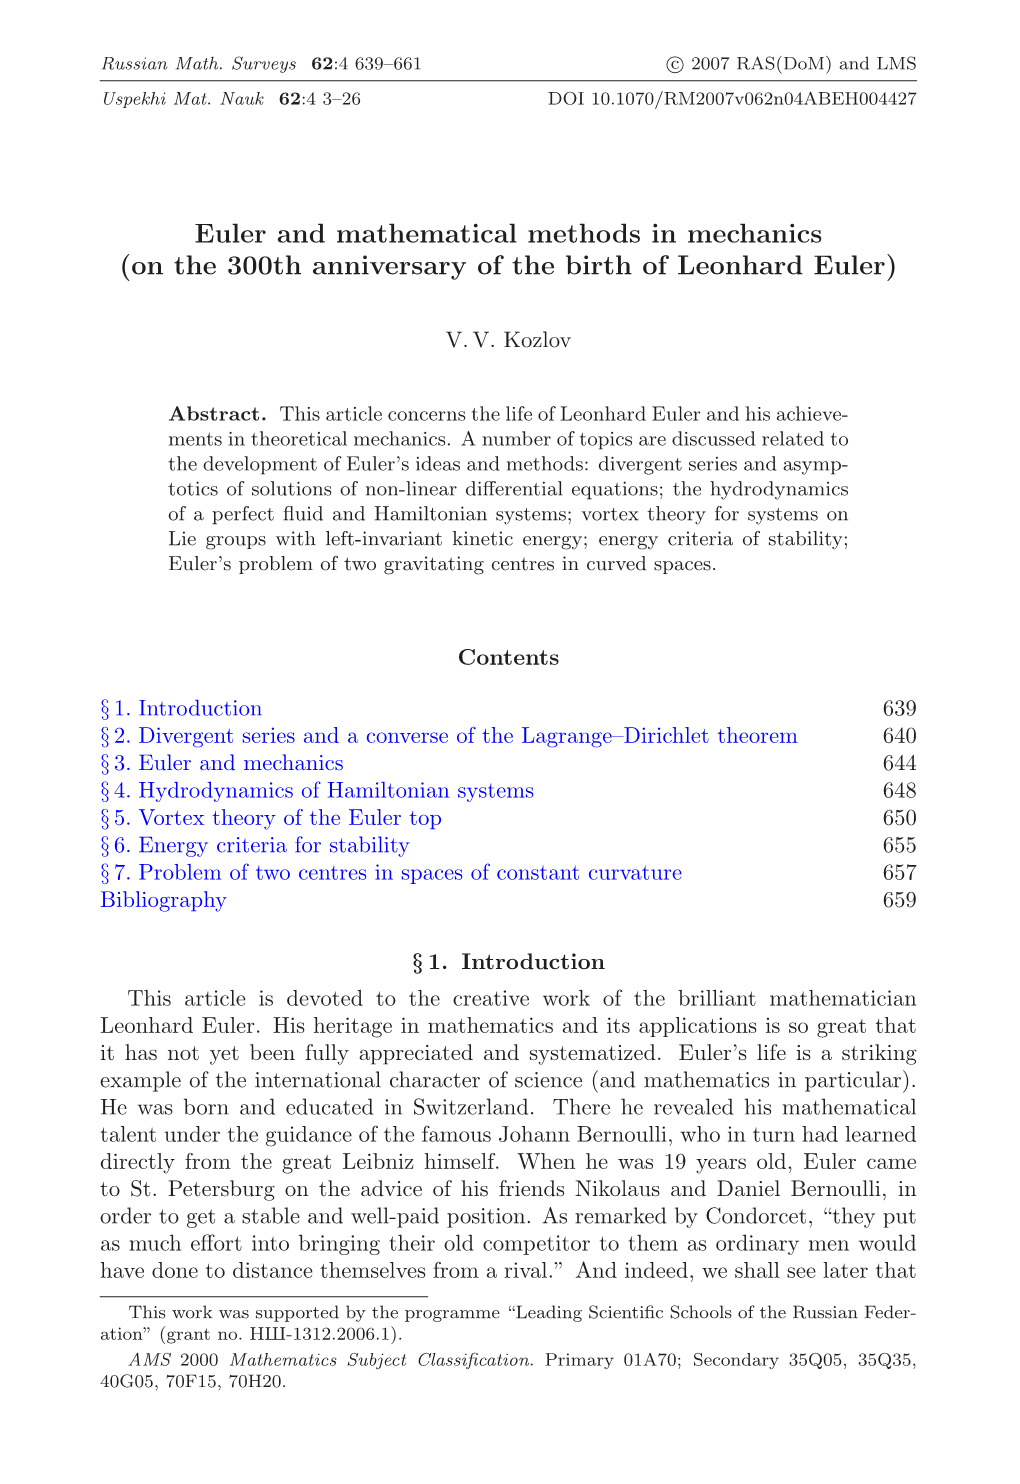 Euler and Mathematical Methods in Mechanics (On the 300Th Anniversary of the Birth of Leonhard Euler)